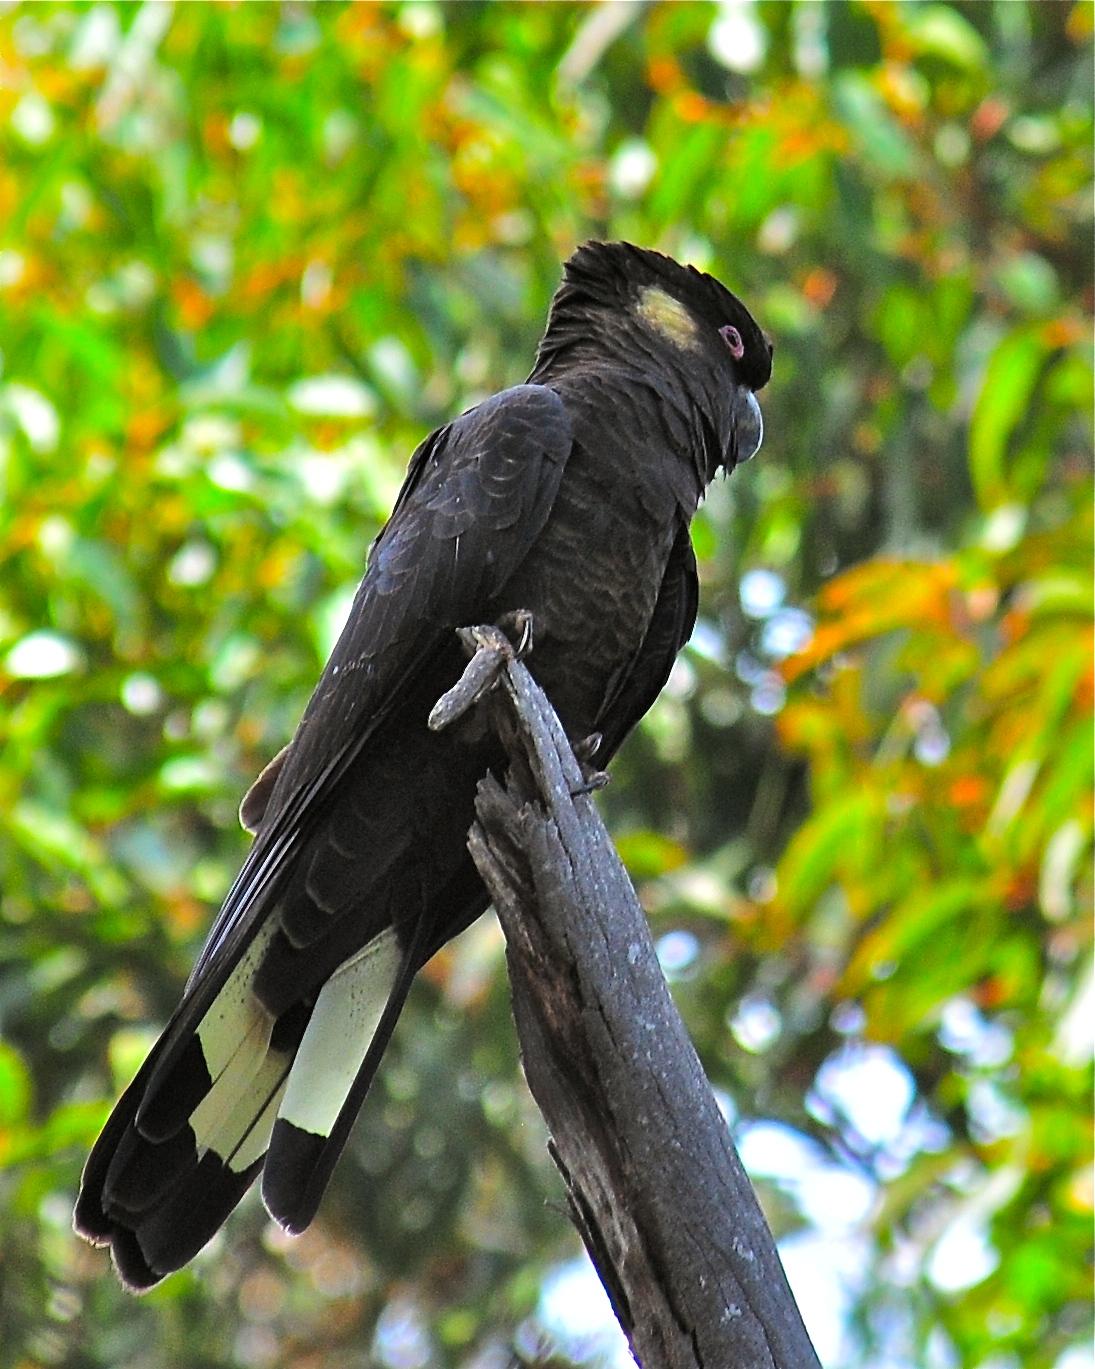 Yellow-tailed Black-Cockatoo Photo by Gerald Friesen